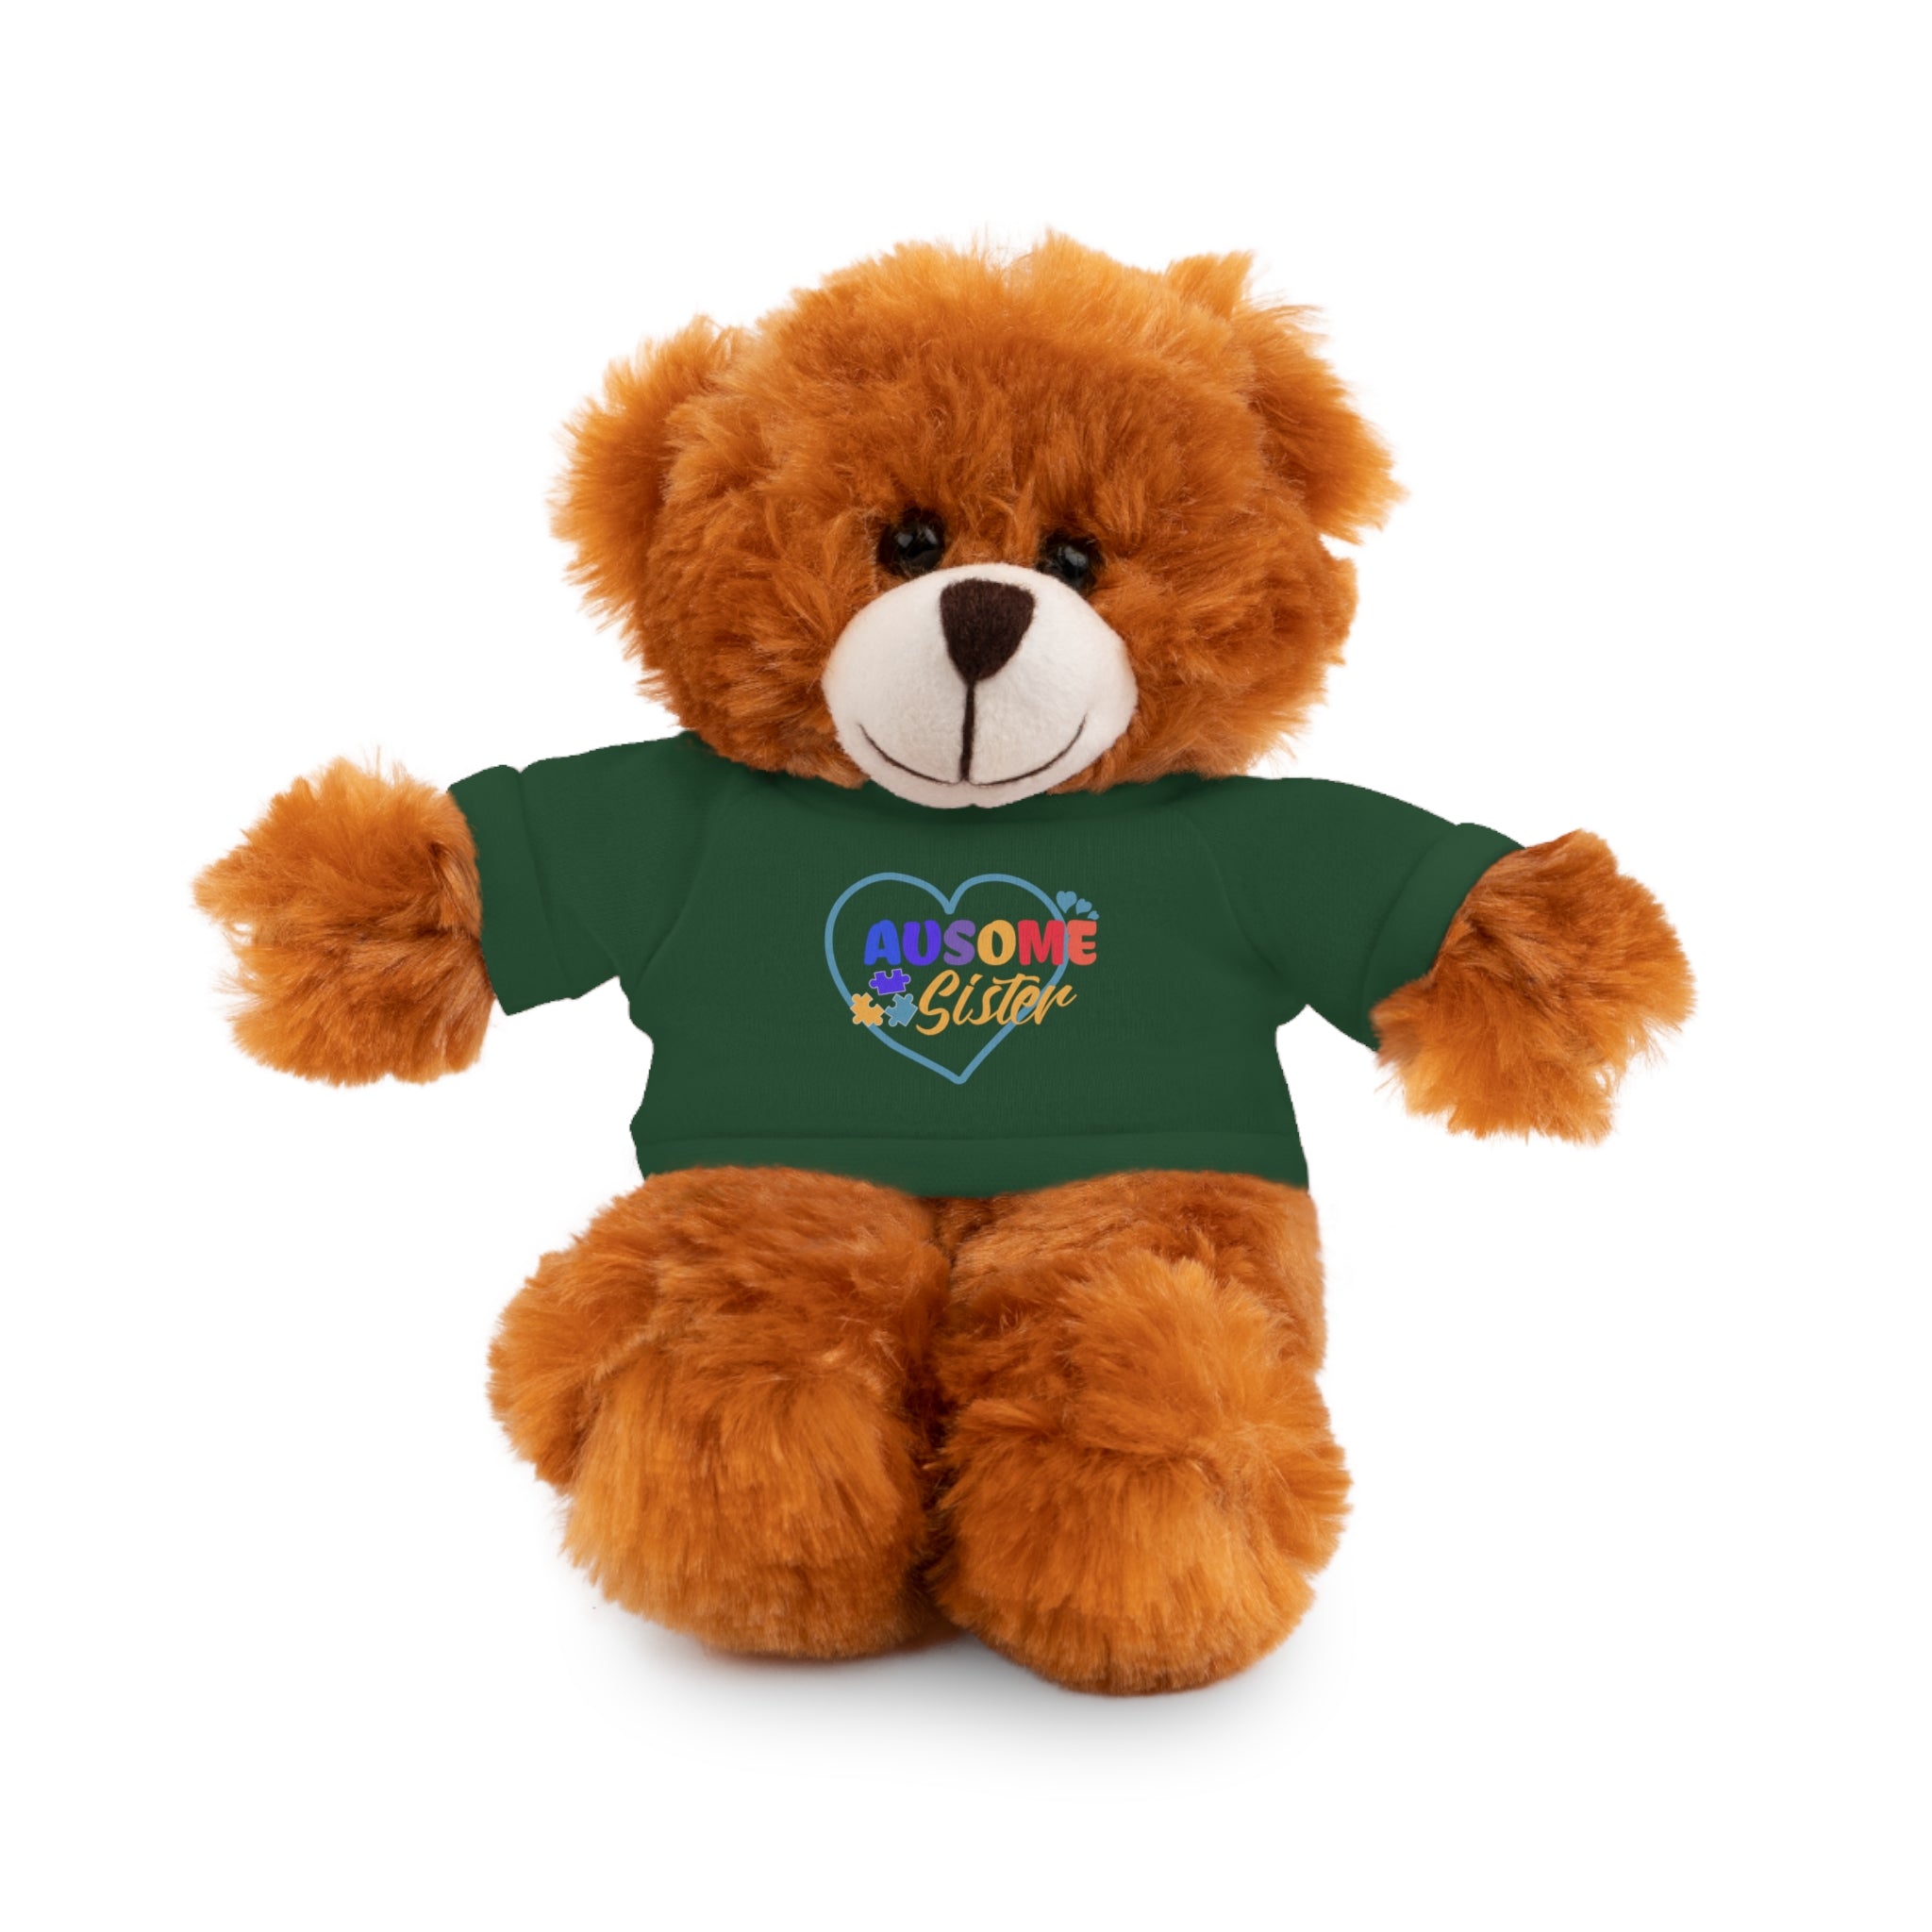 Celebrate Your 'Ausome Sister' with Autism Awareness Stuffed Bear - Customized Tee Included